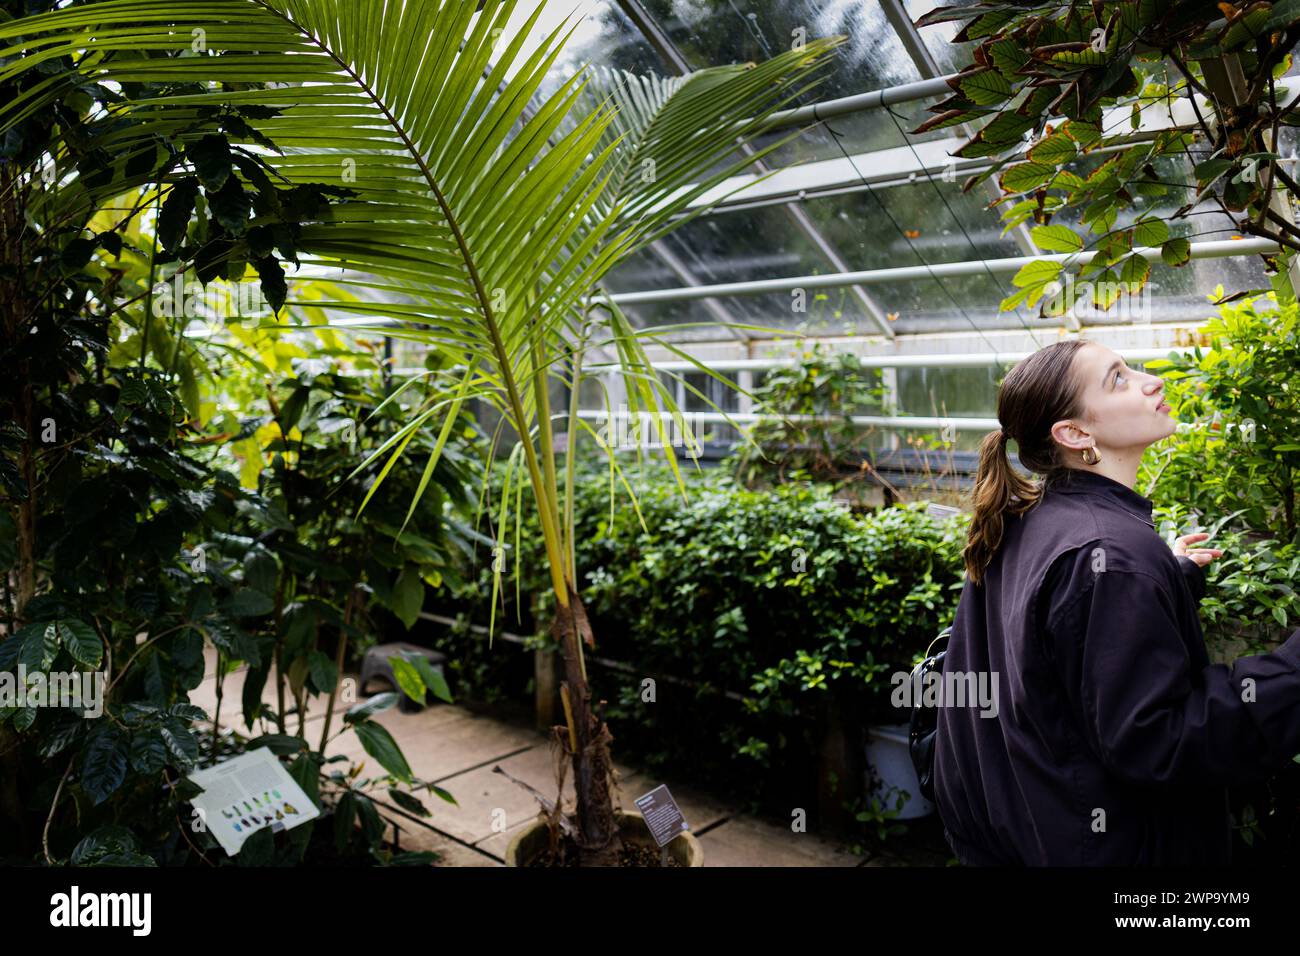 AMSTERDAM - The Hortus Botanicus Amsterdam. The botanical garden has existed since the seventeenth century and contains more than six thousand tropical and native trees and plants. ANP RAMON VAN FLYMEN netherlands out - belgium out Stock Photo